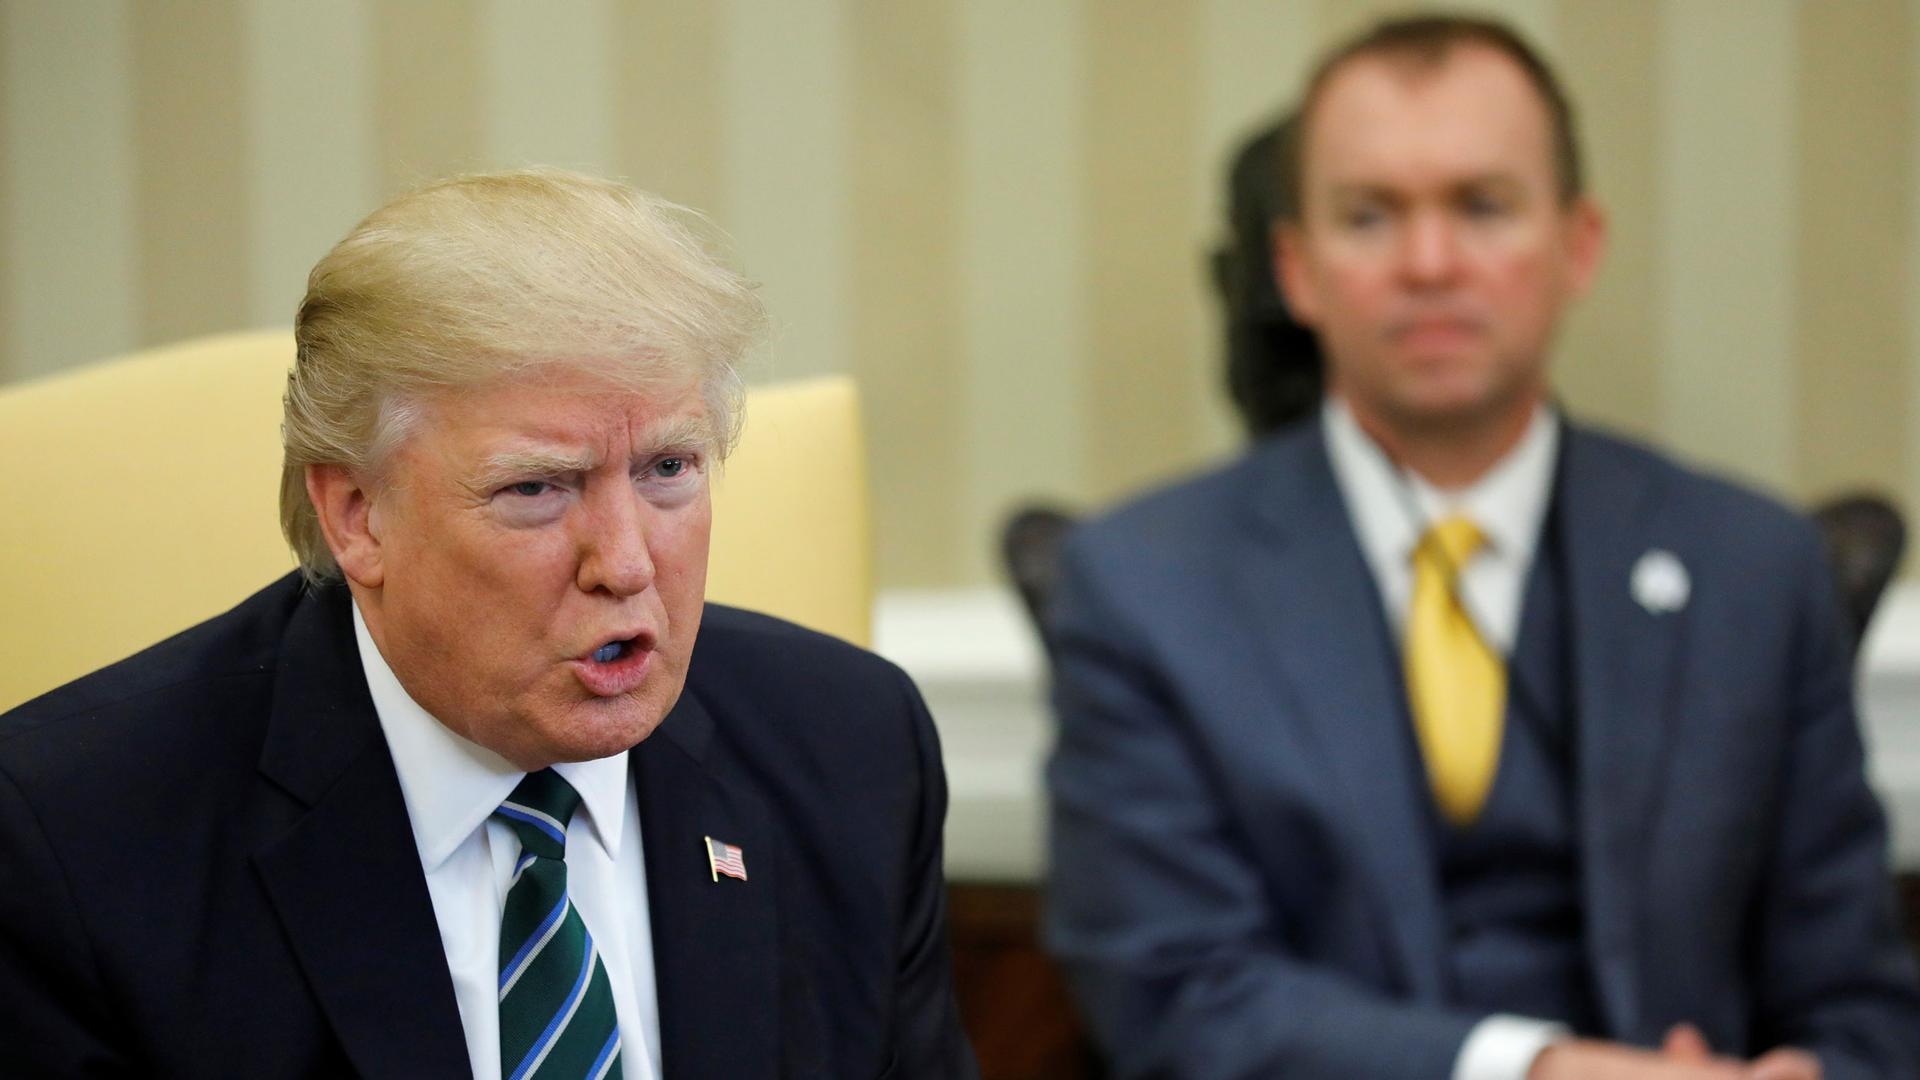 Office of Management and Budget (OMB) Director Mick Mulvaney (R) listens as President Donald Trump (L) meets with members of the Republican Study Committee